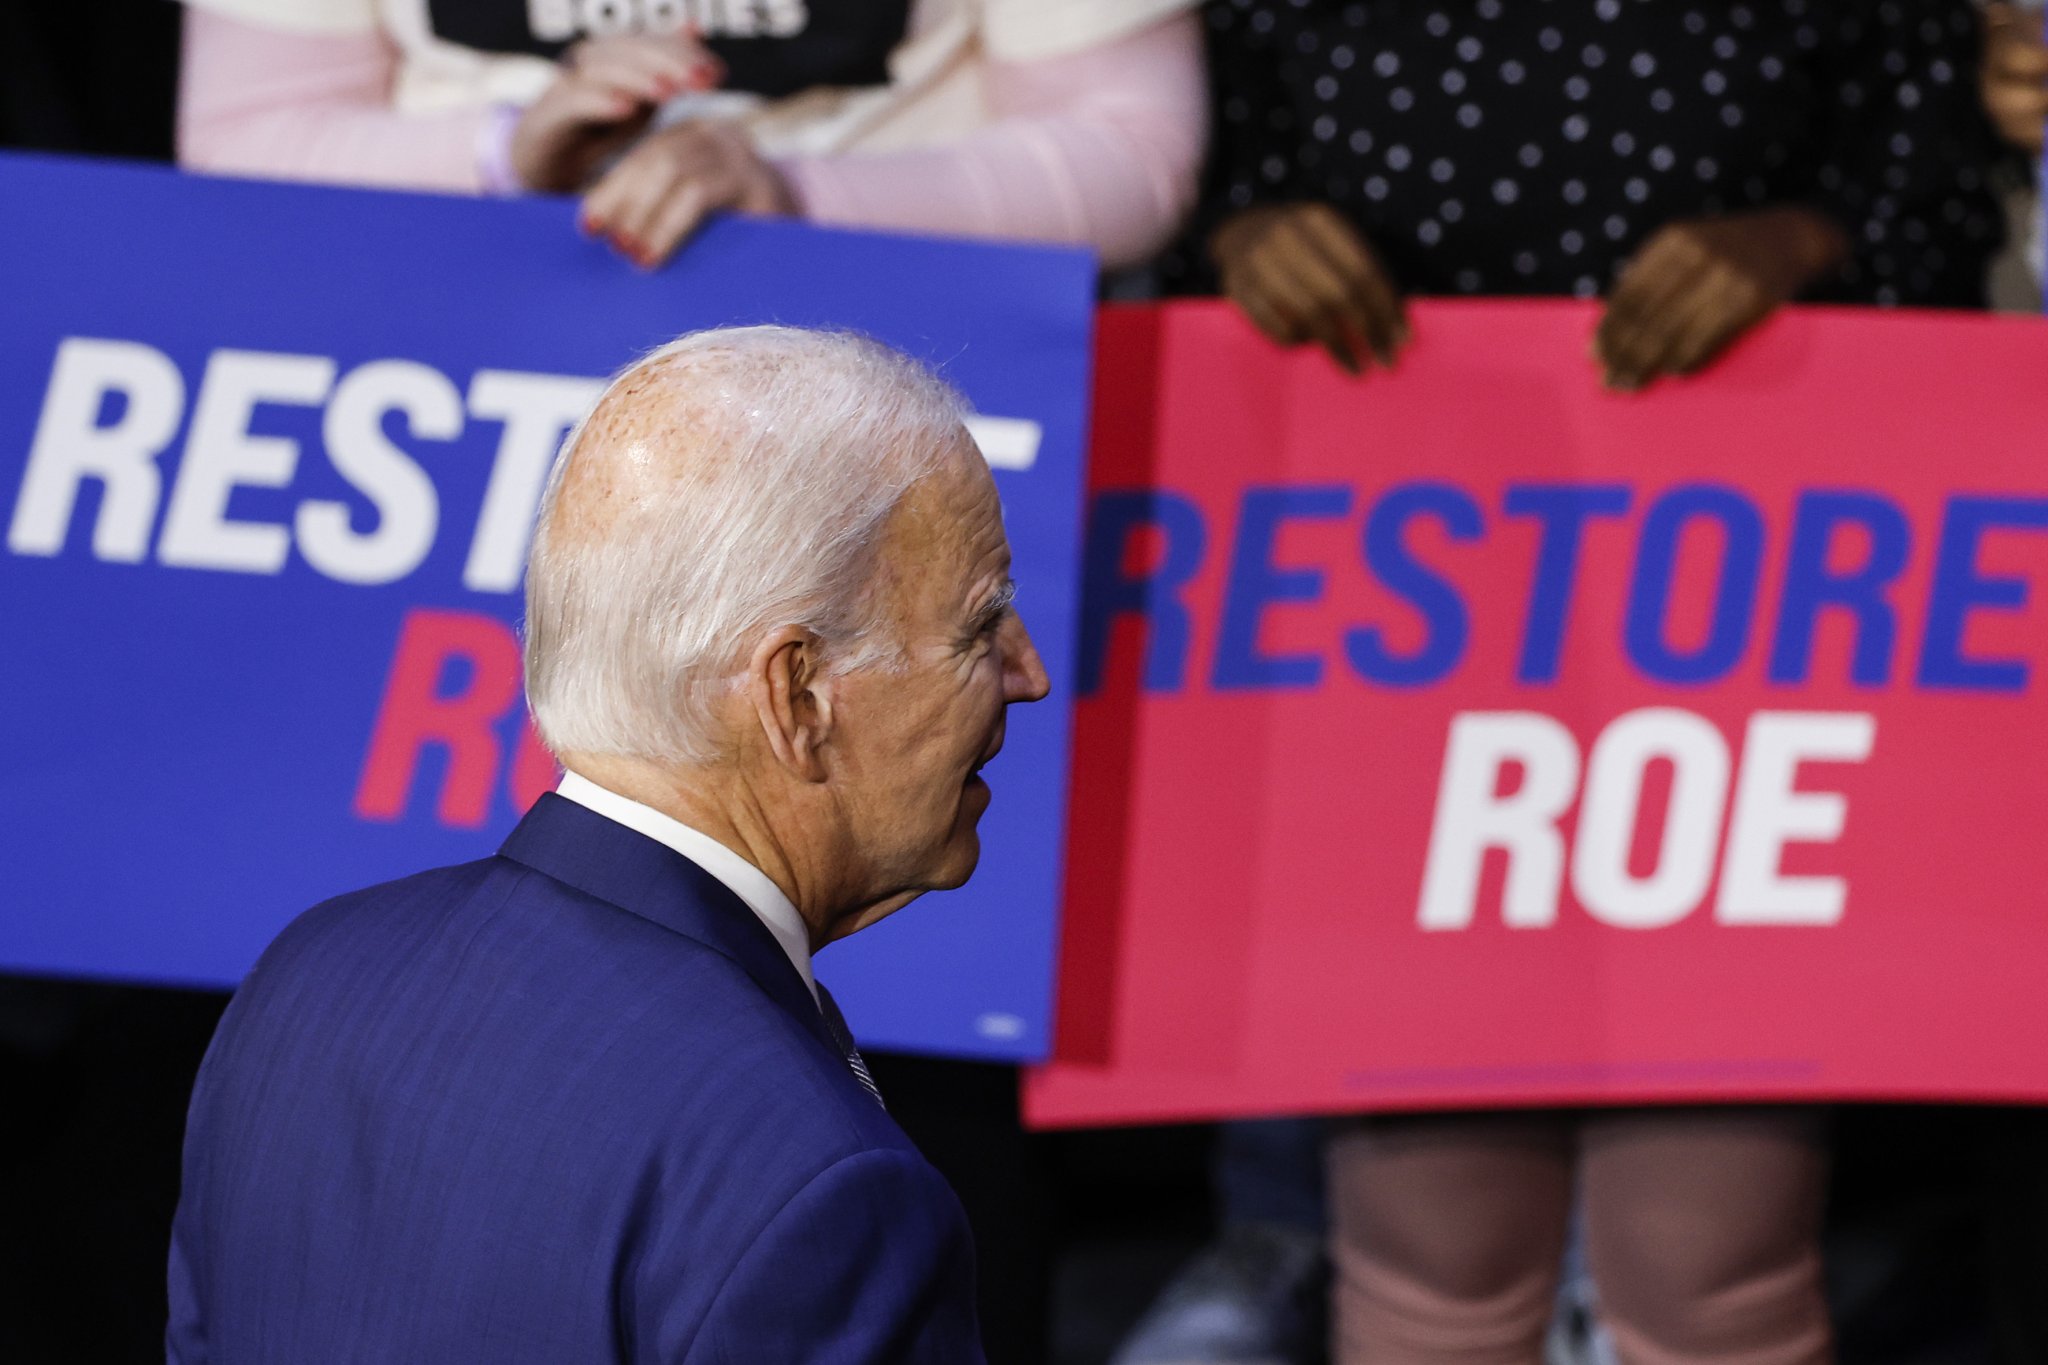 Biden ready to make abortion rights a central issue in 2024 campaign